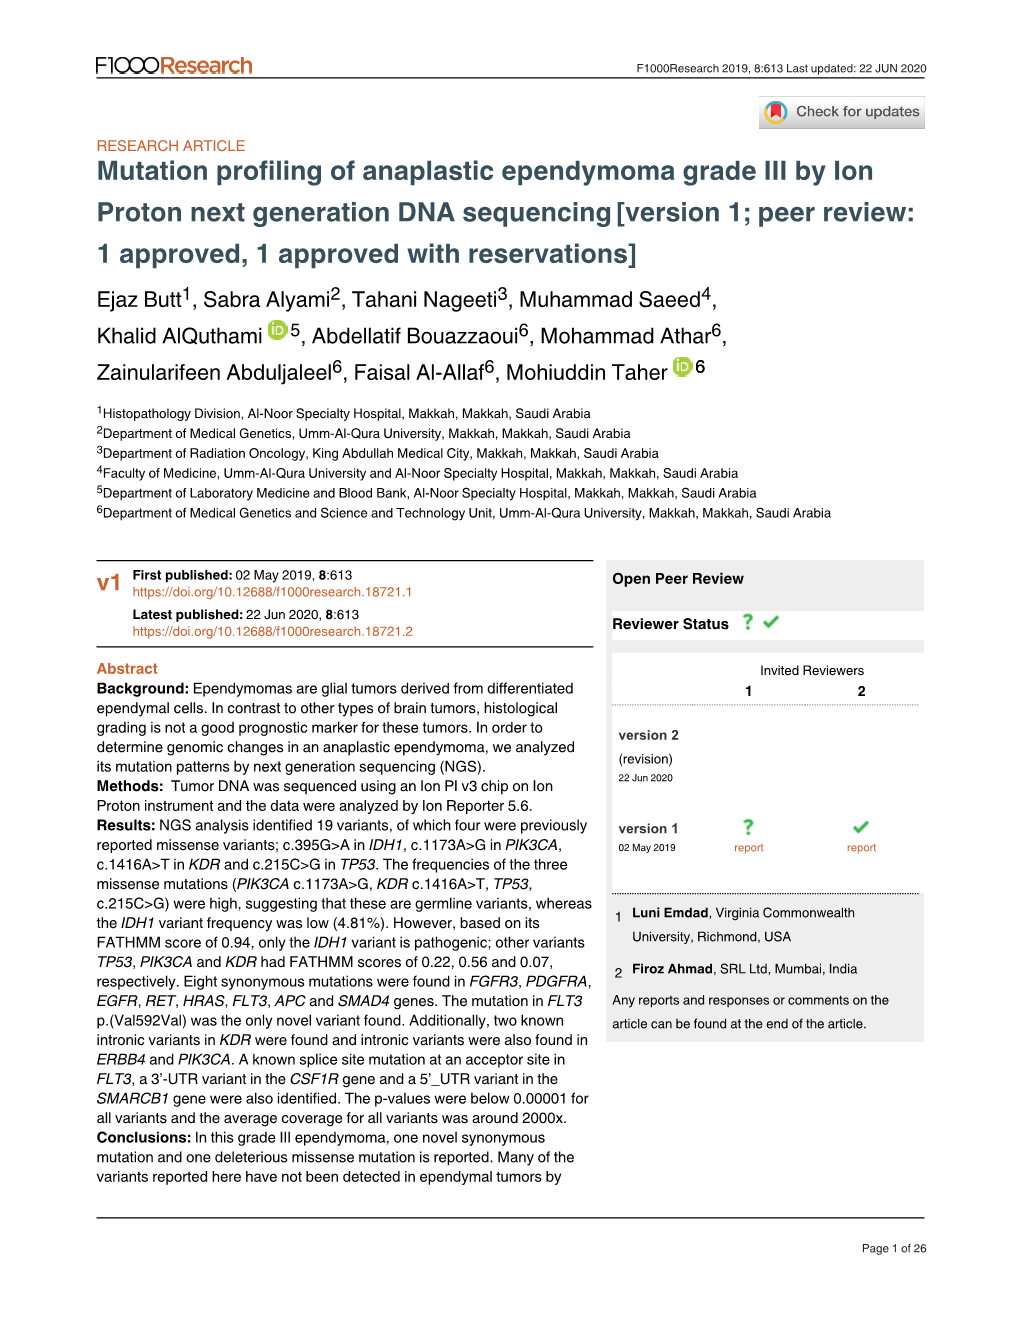 Mutation Profiling of Anaplastic Ependymoma Grade III by Ion Proton Next Generation DNA Sequencing[Version 1; Peer Review: 1